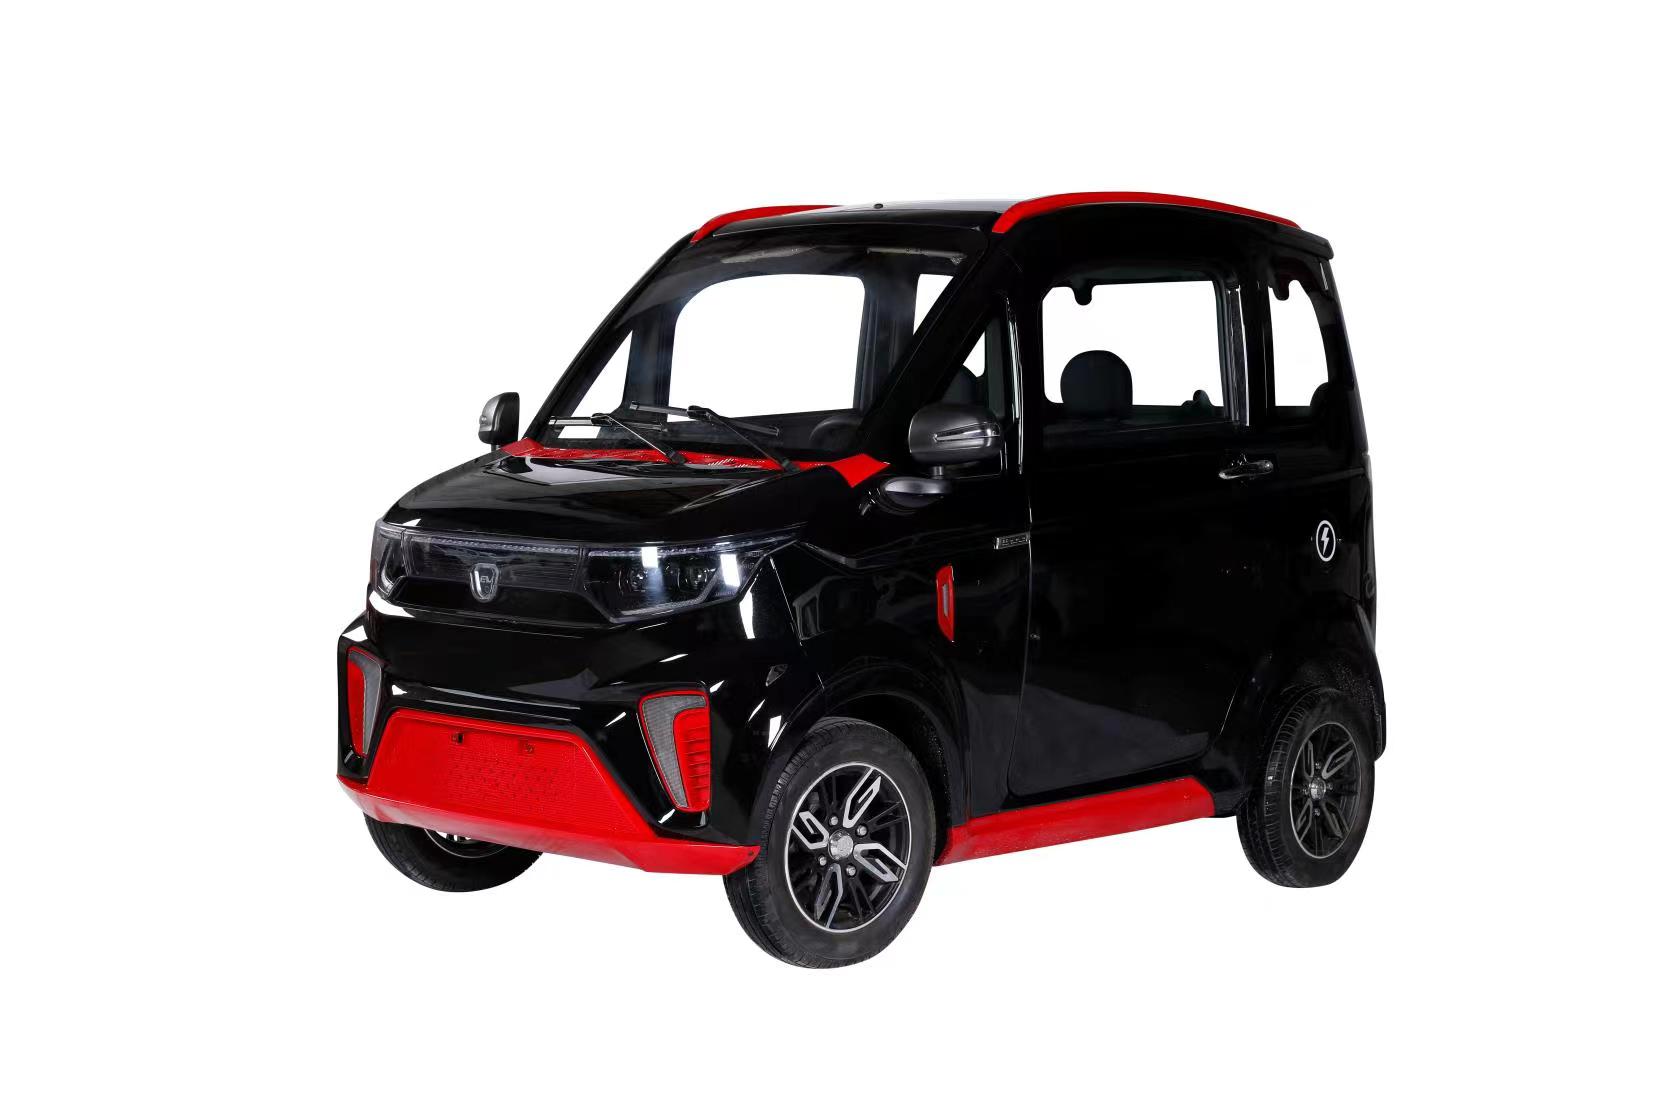 EEC/COC certified small electric car X8 made in China